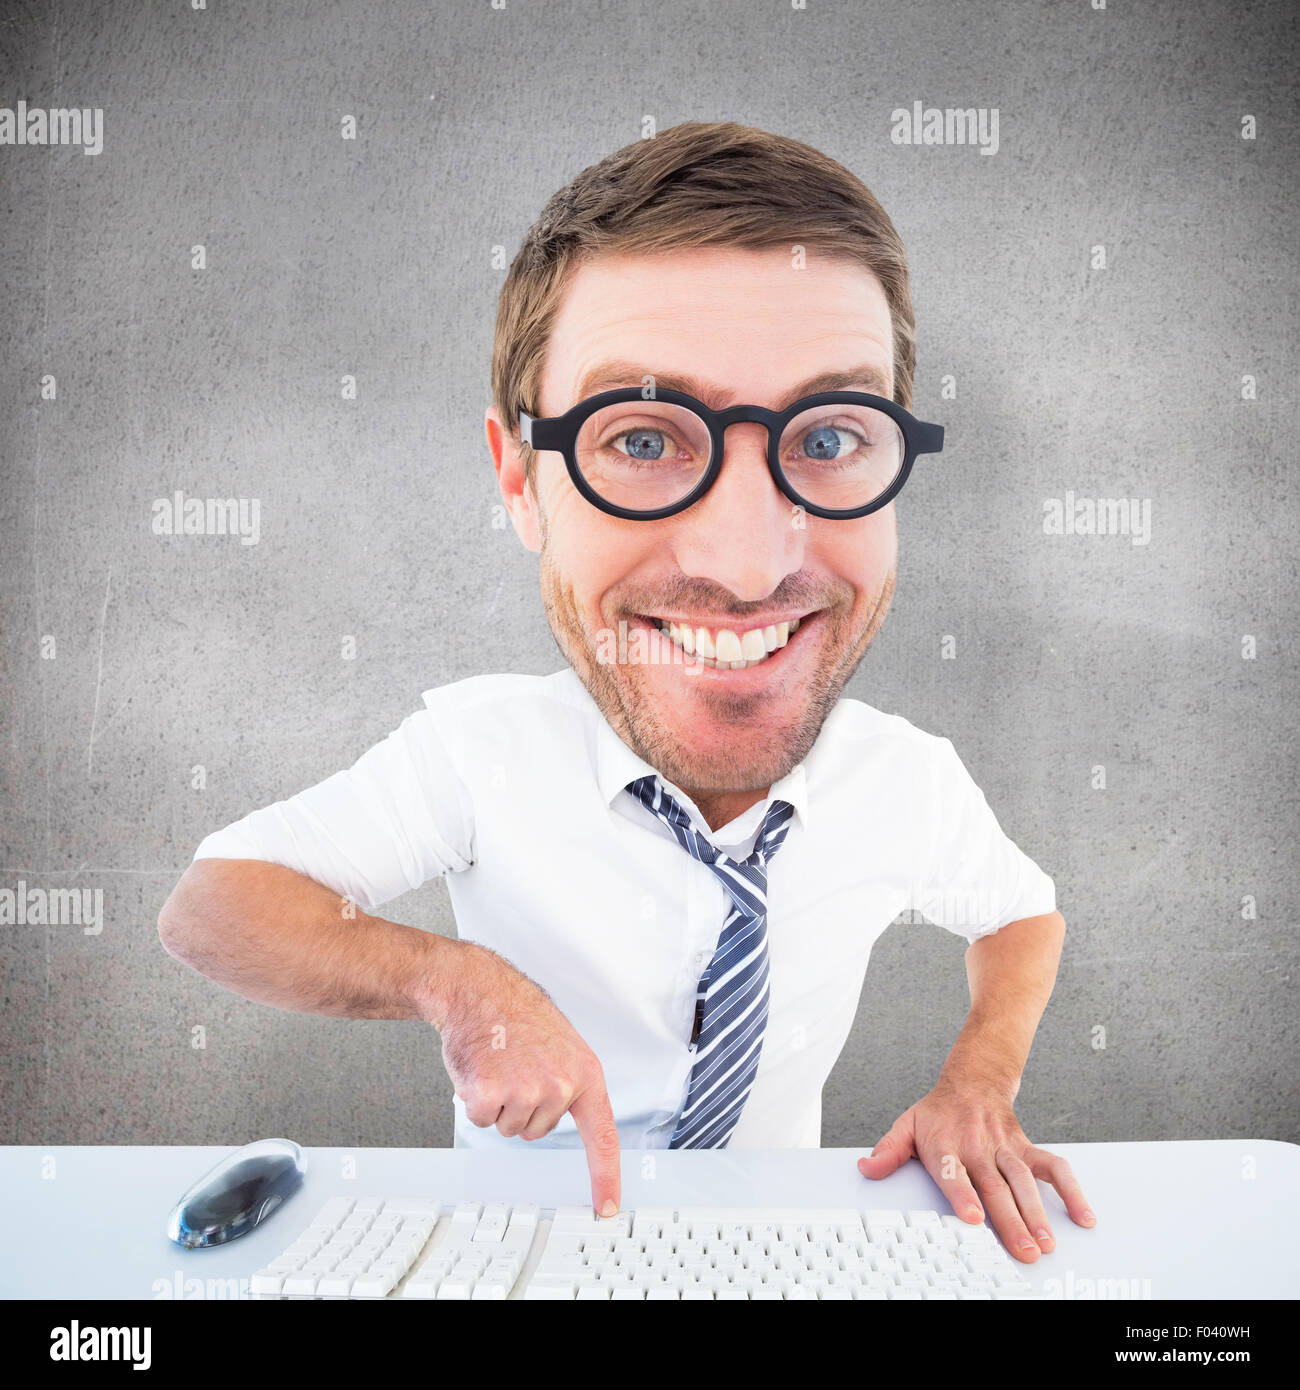 Composite image of geeky businessman typing Stock Photo